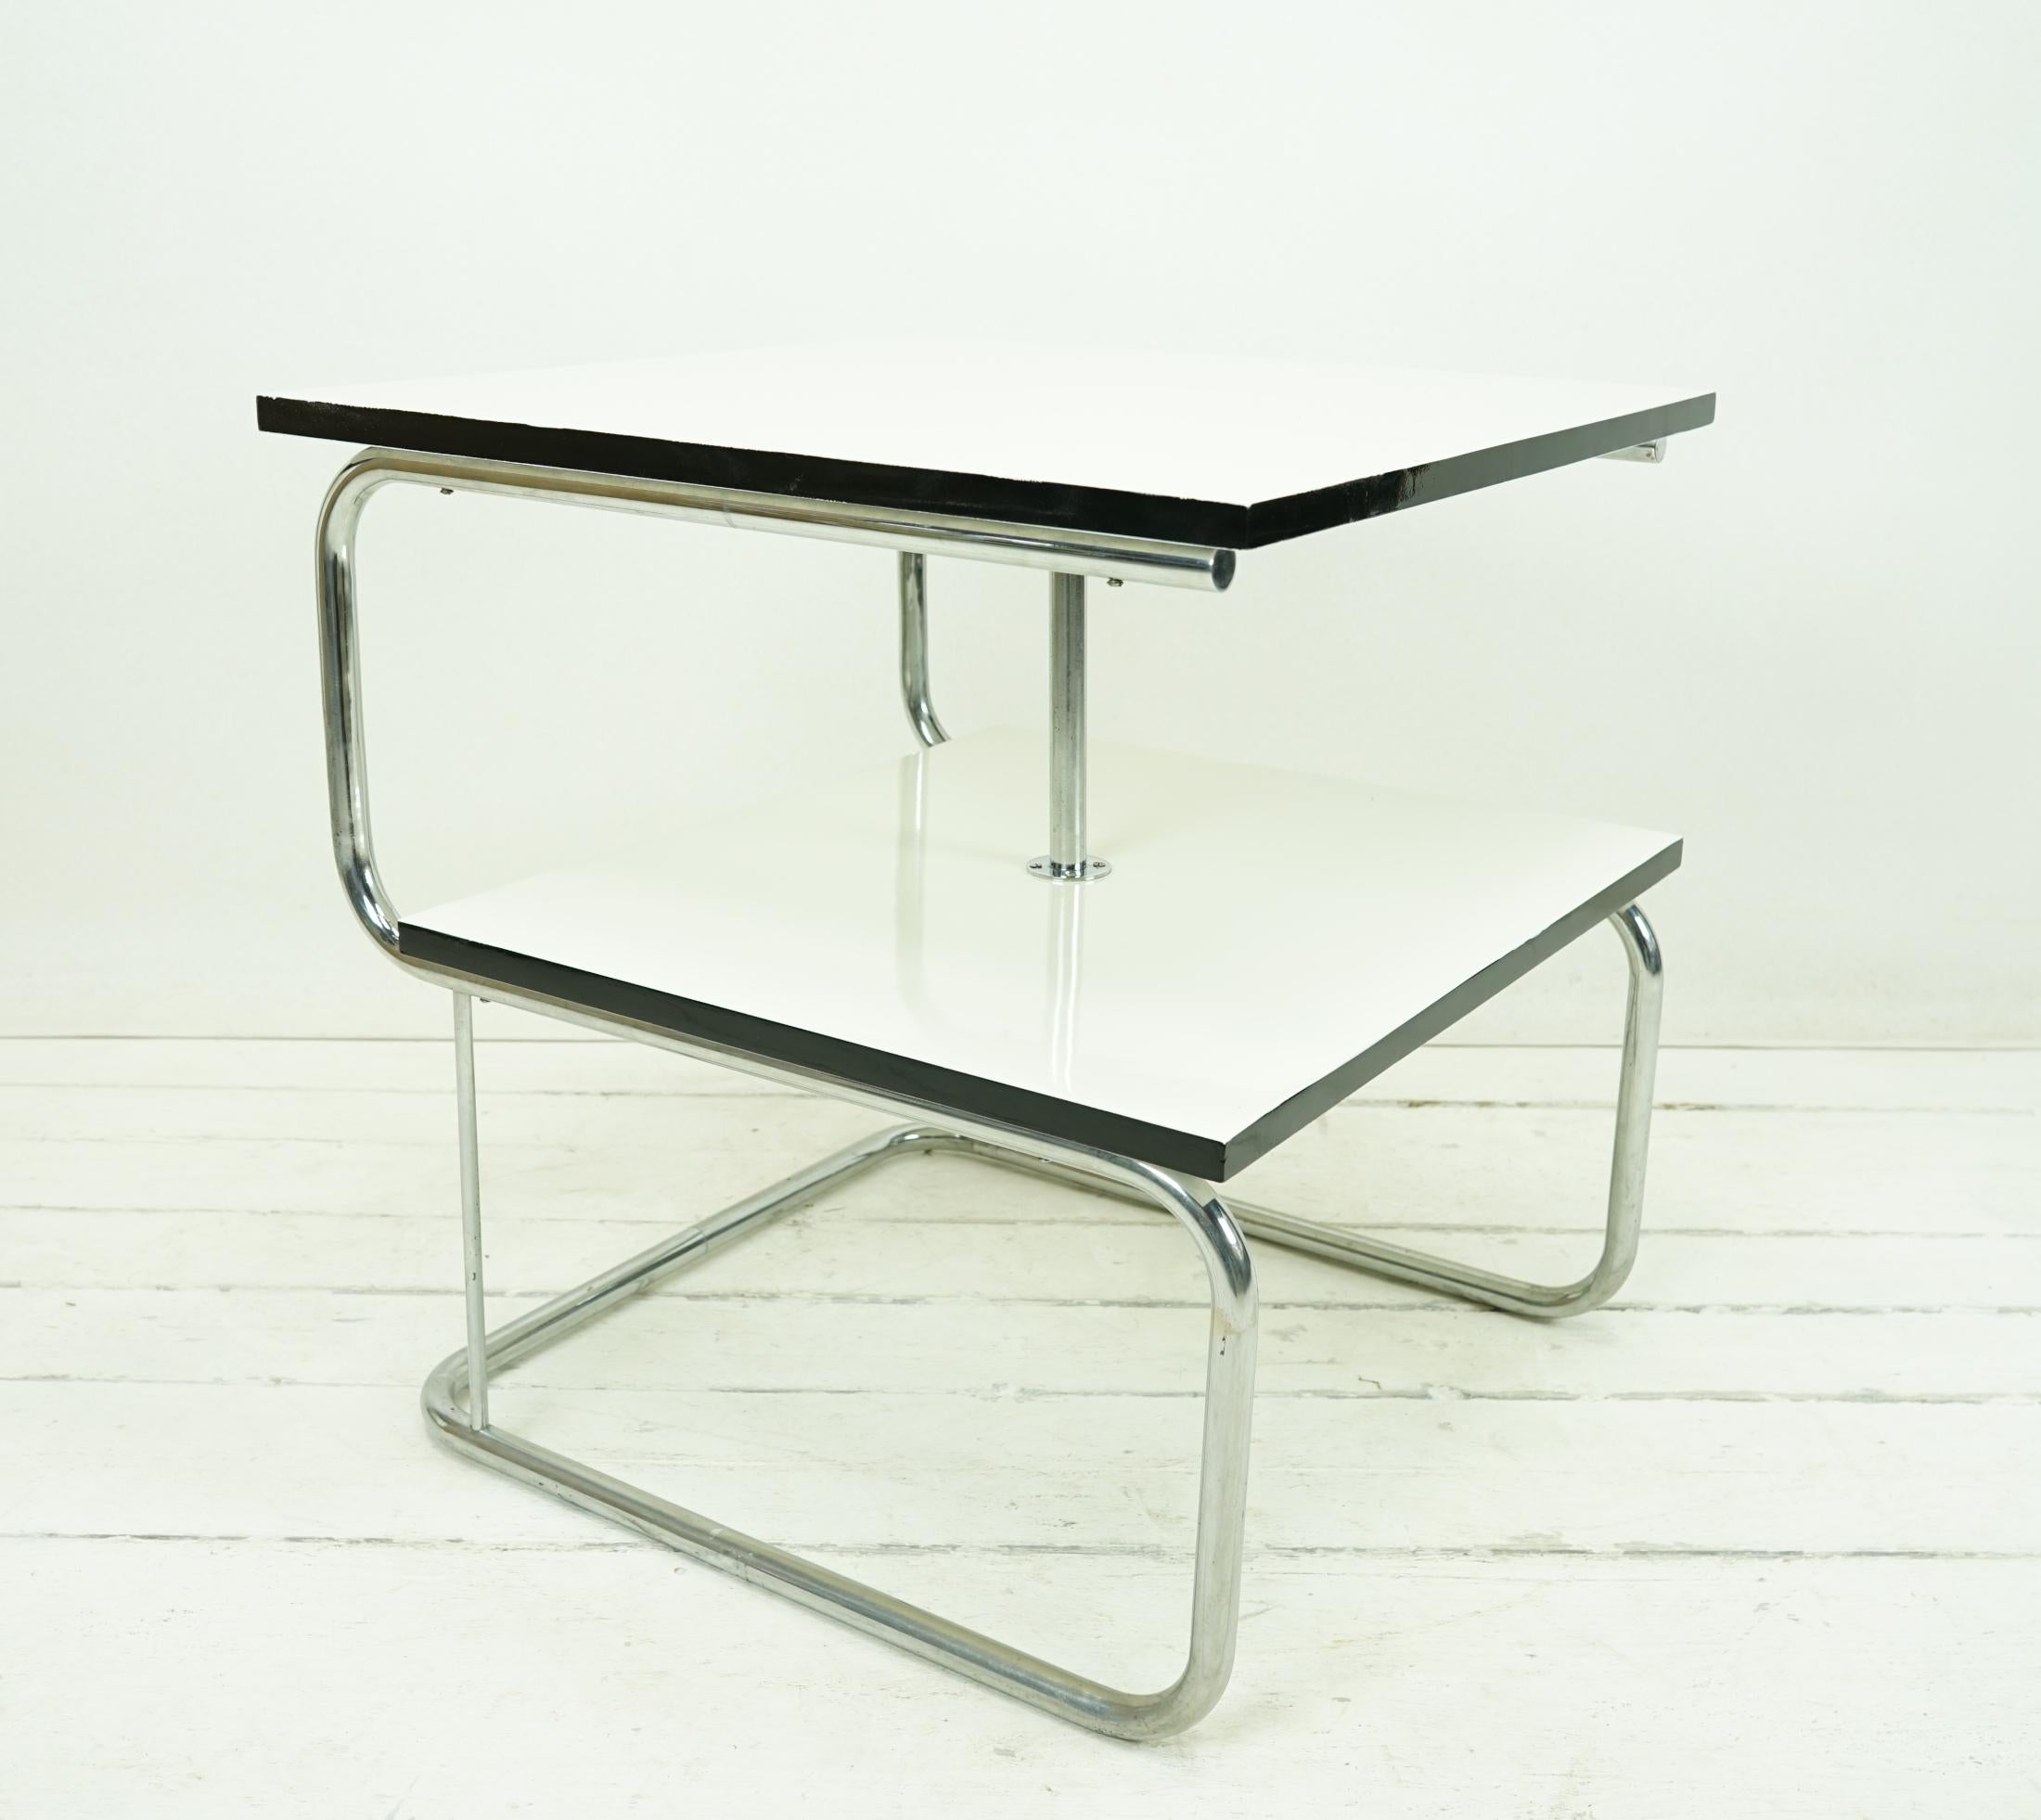 Object: Table

Time: original around 1935
 
Design/Manufacturer: Mücke Melder

Dimensions: H 73,5 W 70 D 70

Table with two lacquered square blockboards
Pearl white with black edges
Chrome frame

10 (impeccable condition)
9 X patina,